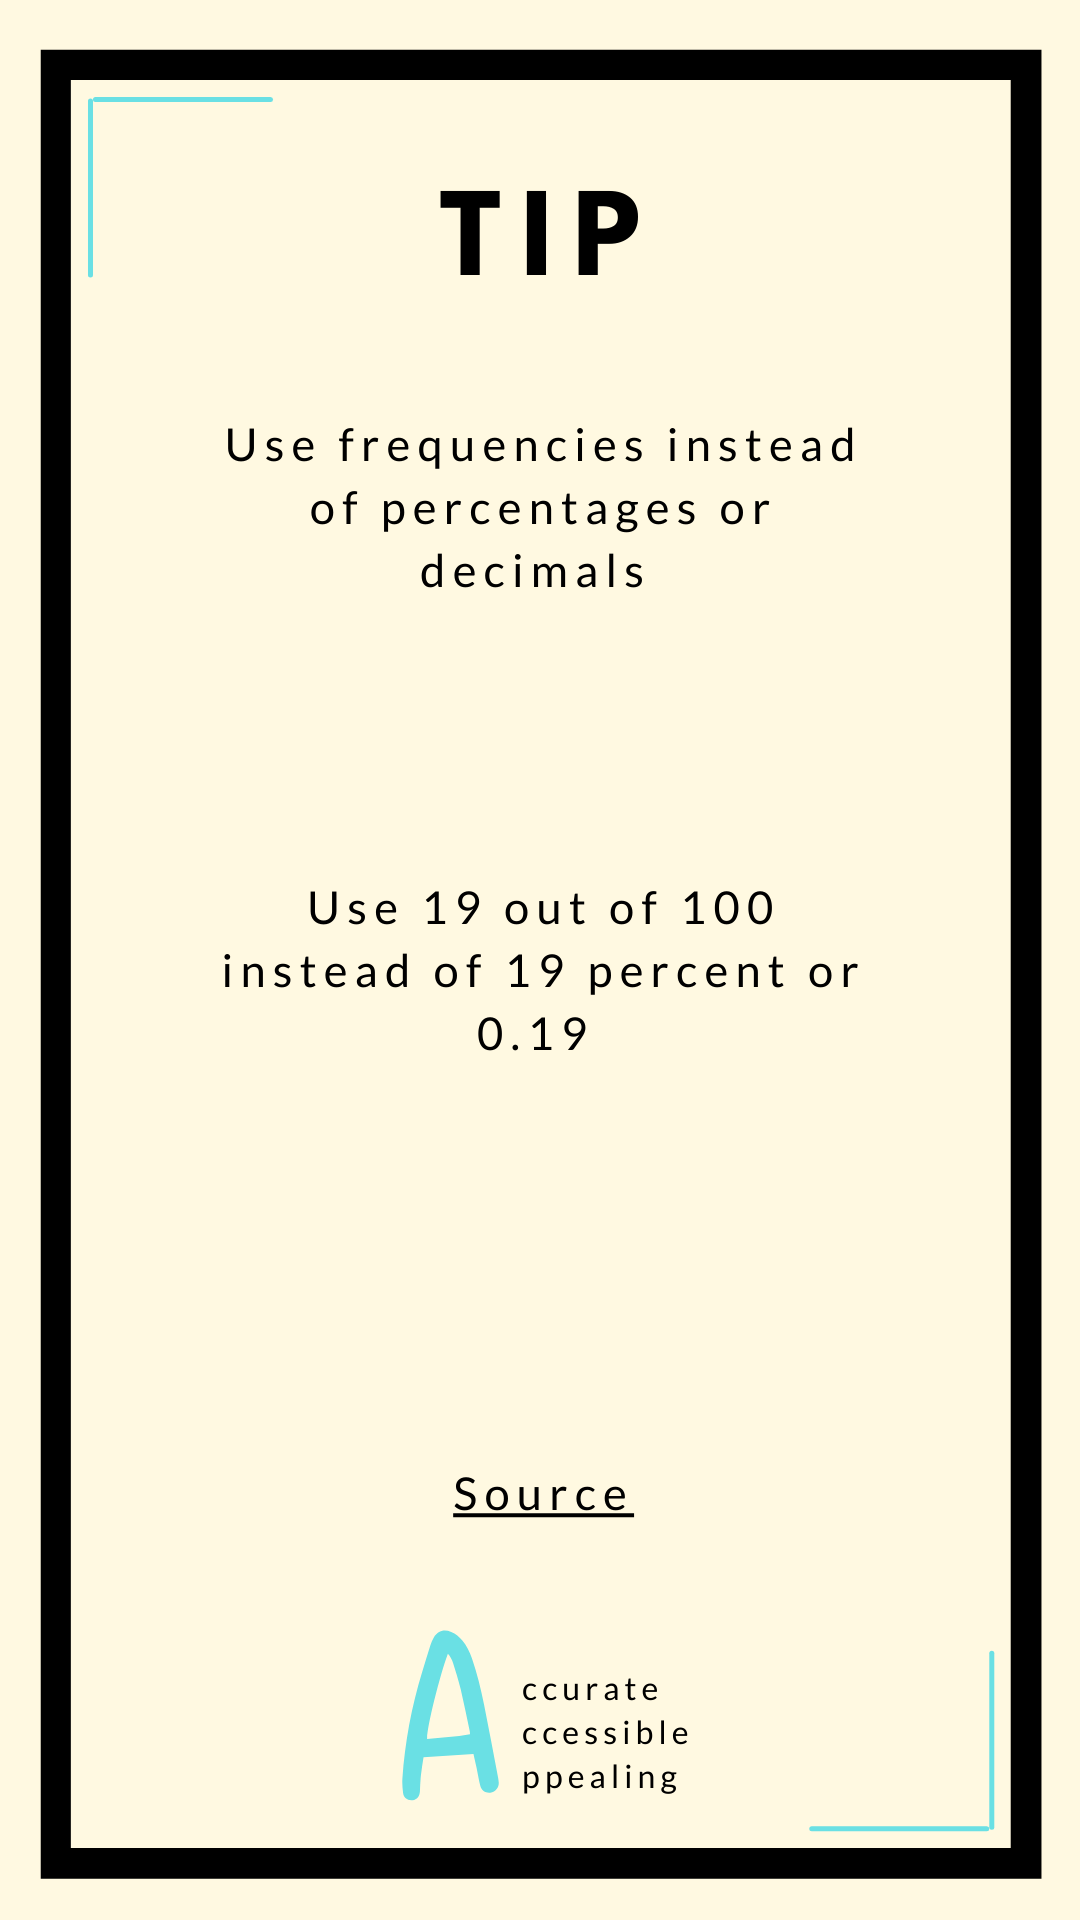 Tip- Use frequencies instead of percentages or decimals - Use 19 out of 100 instead of 19 percent or 0.19 - Accurate, Accessible, and Appealing